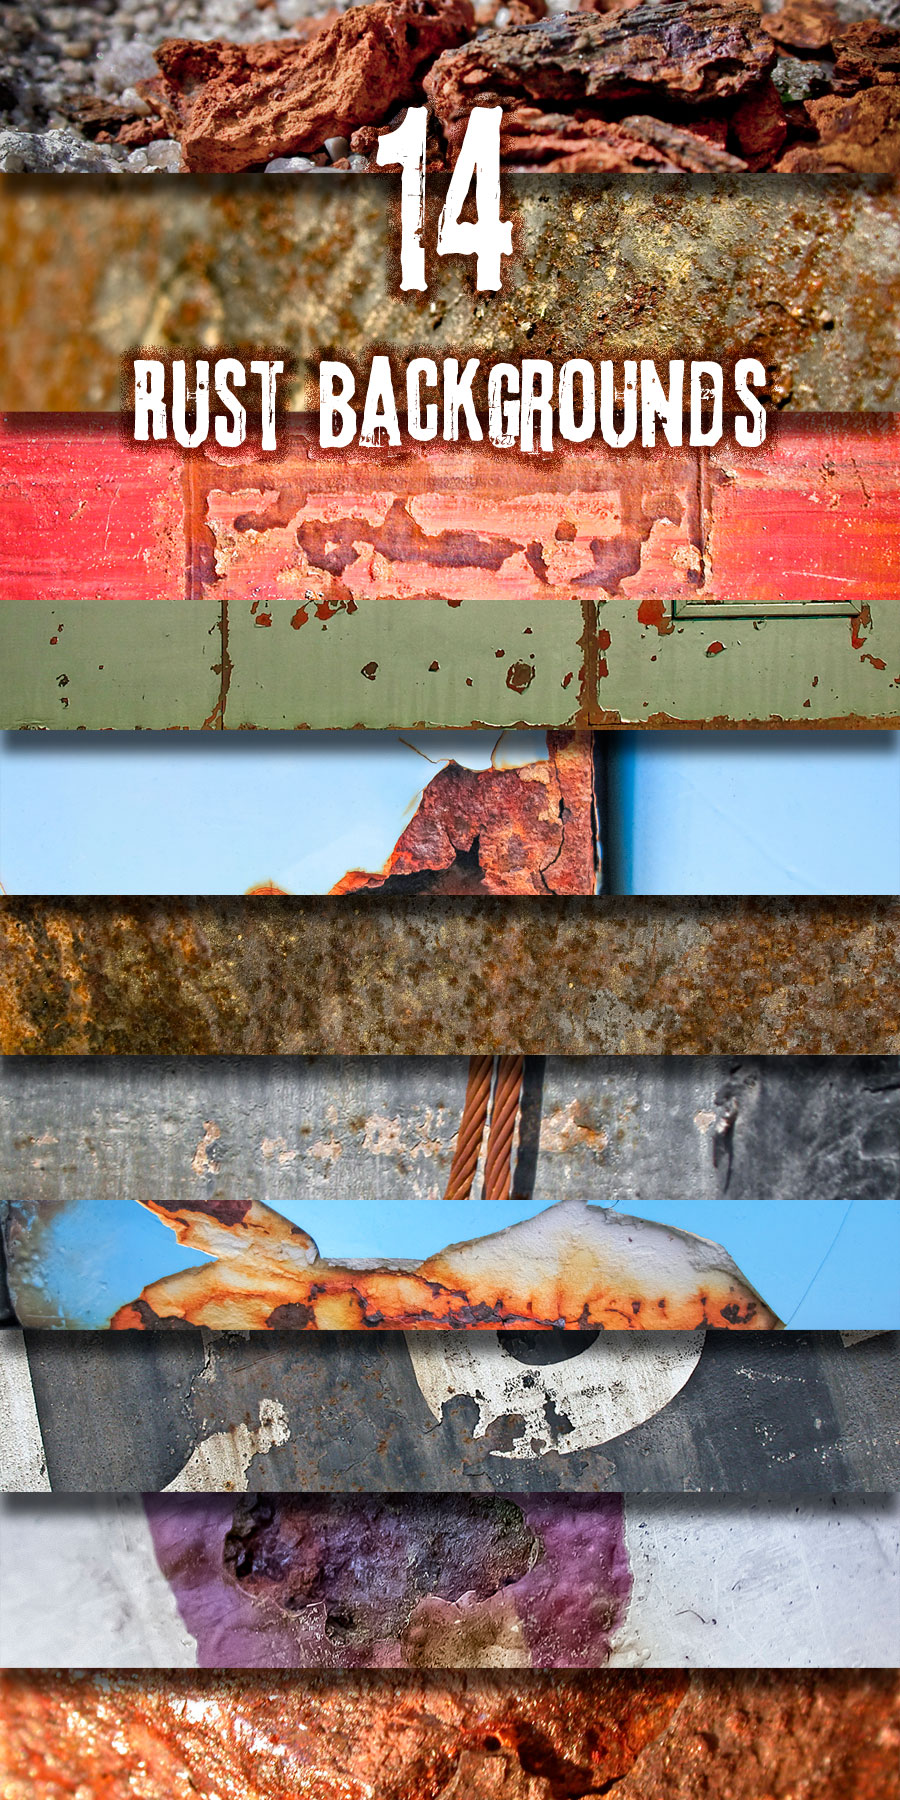 rust-backgrounds